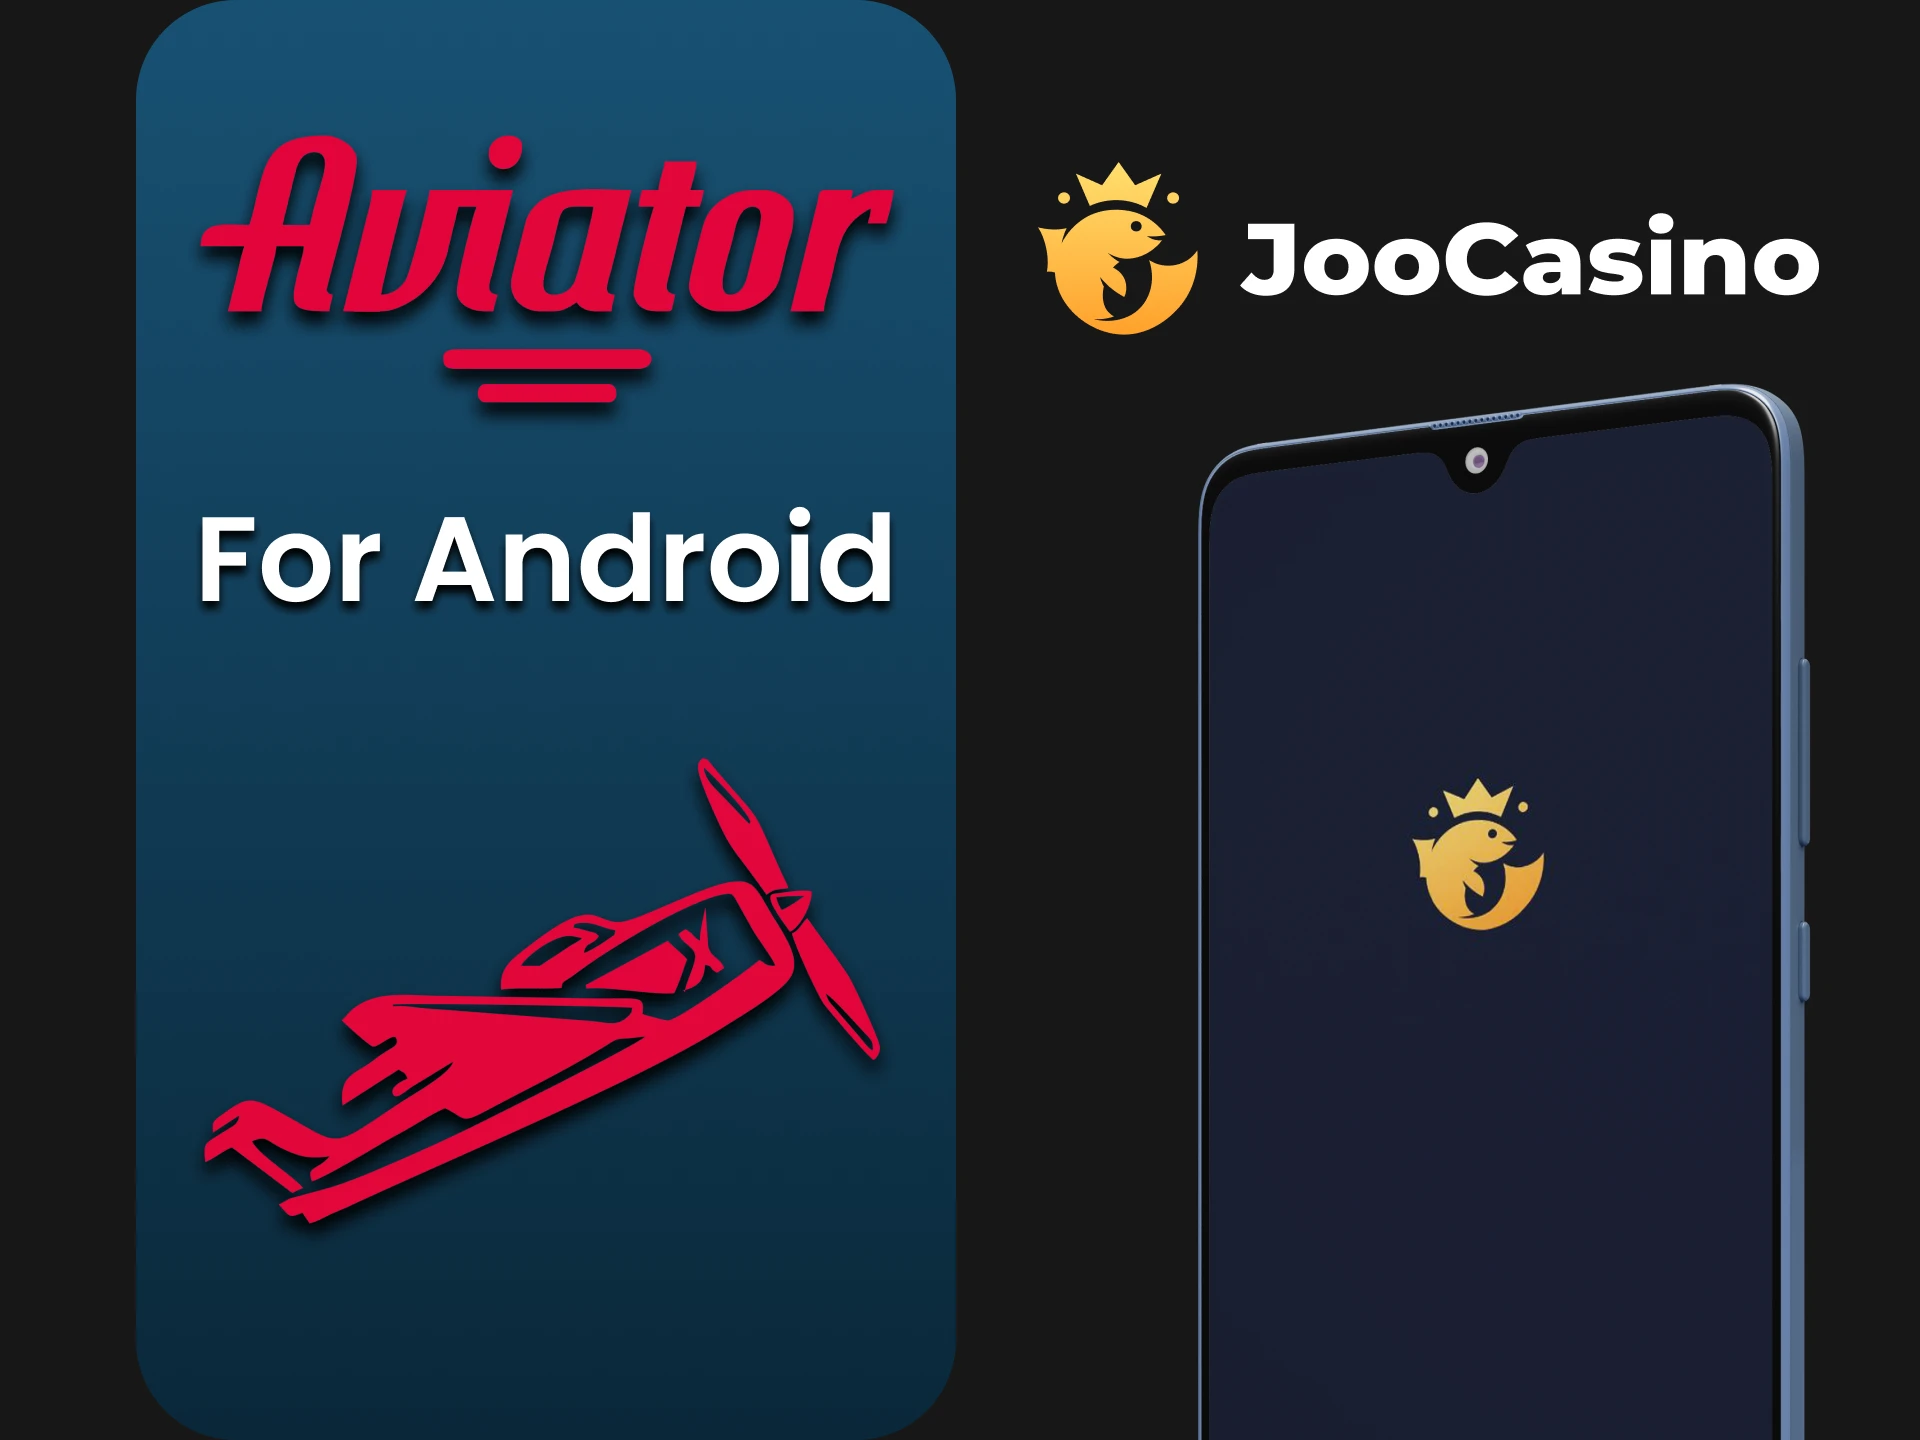 Play Aviator in the Joo Casino app on Android devices.